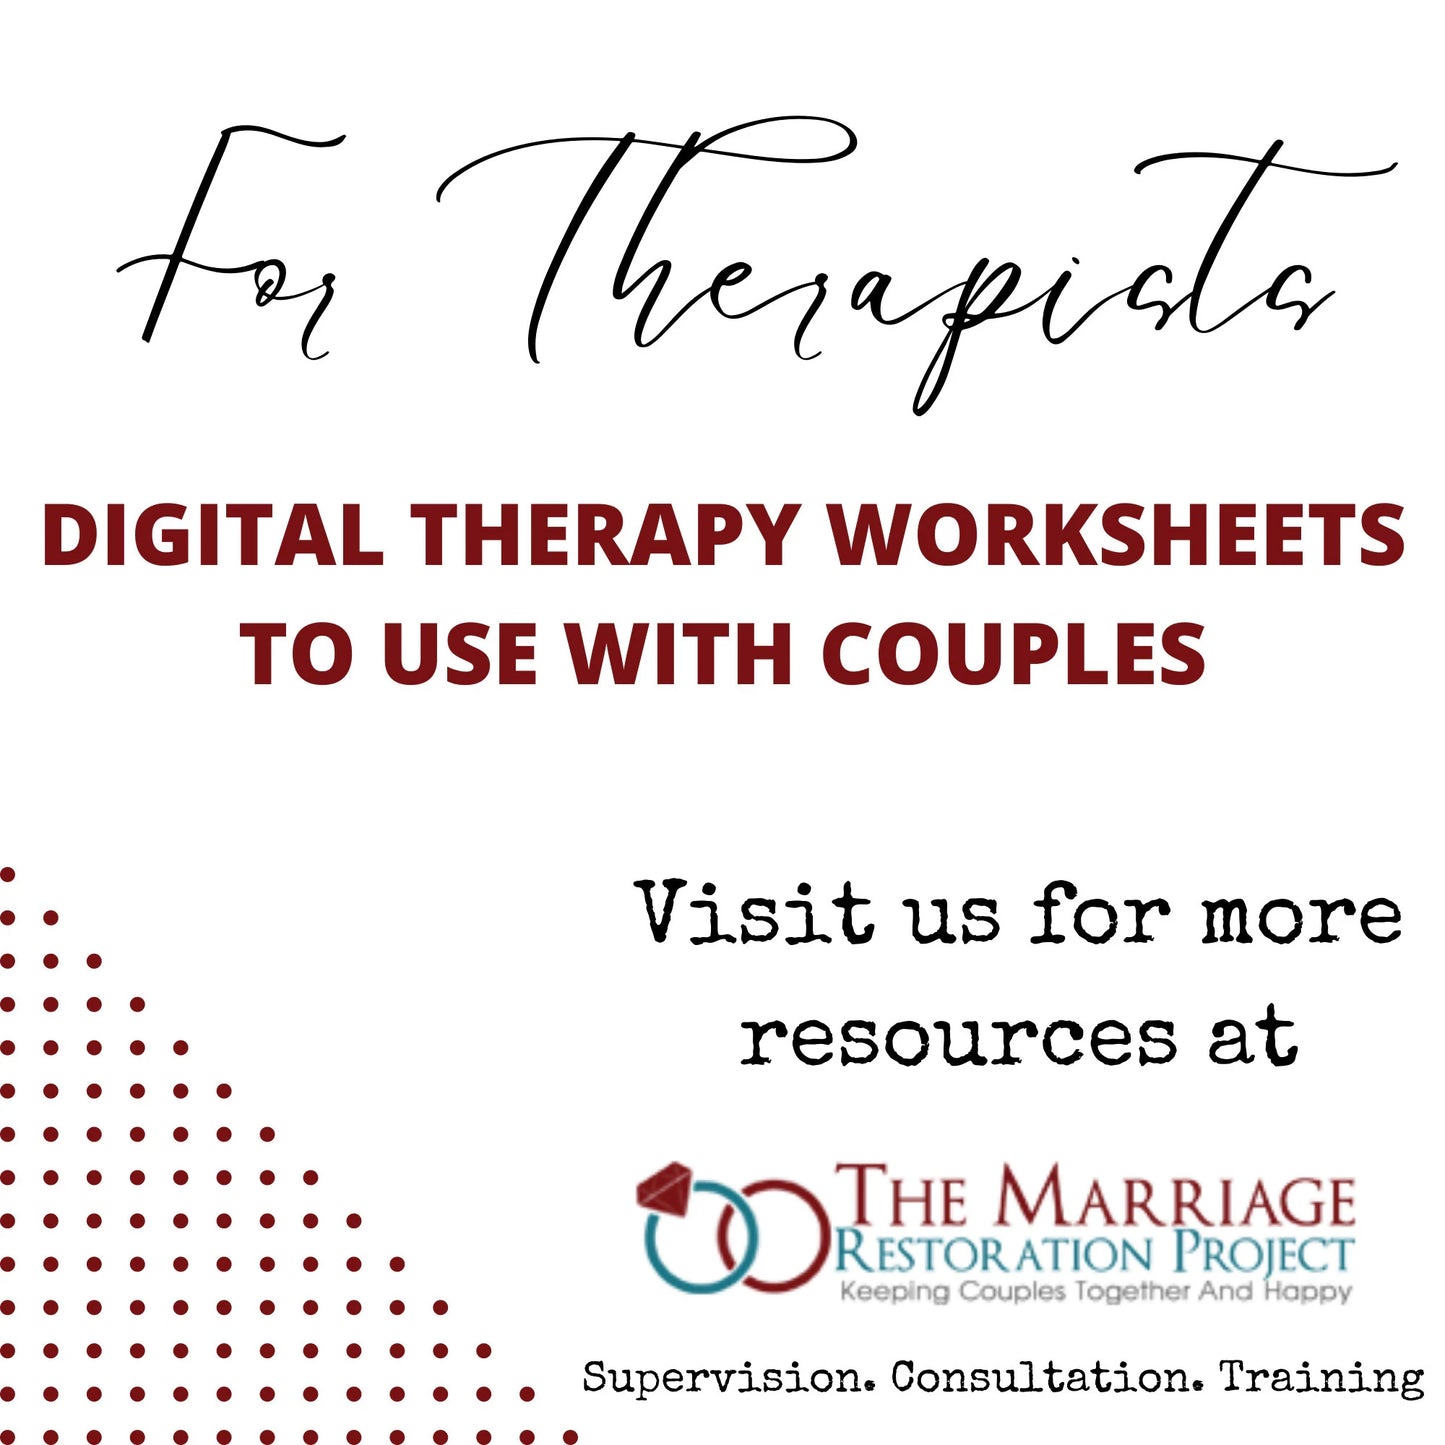 Therapist Handouts Therapy Worksheet Therapy Workbook Therapist Resources Therapist worksheets Therapy Journal Prompts Emotion wheel DBT CBT